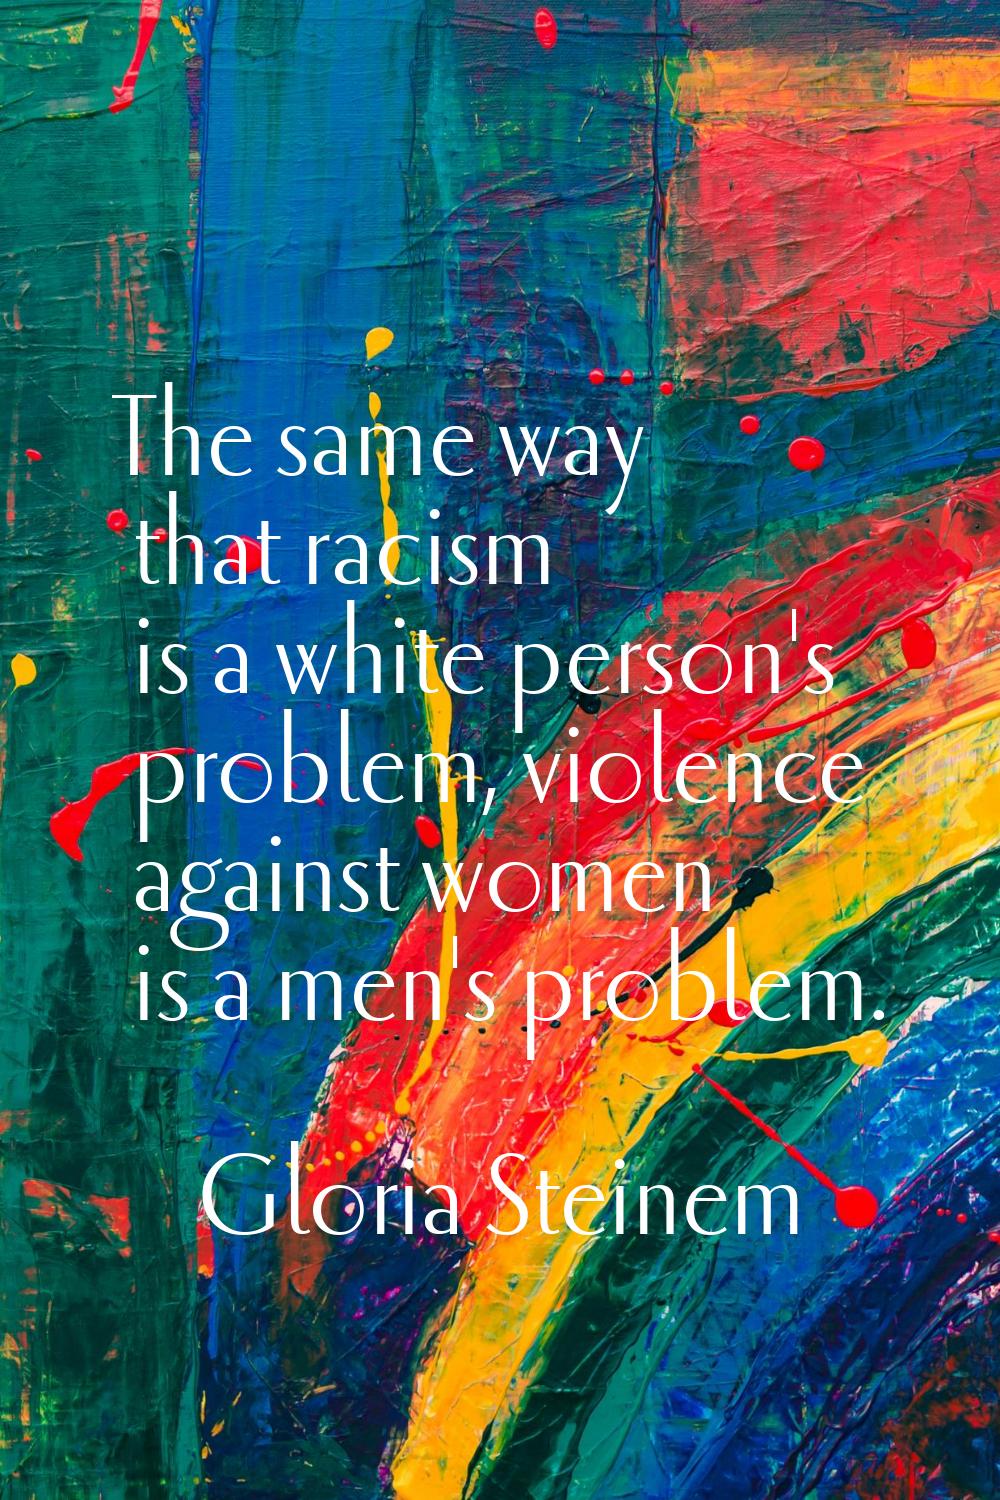 The same way that racism is a white person's problem, violence against women is a men's problem.